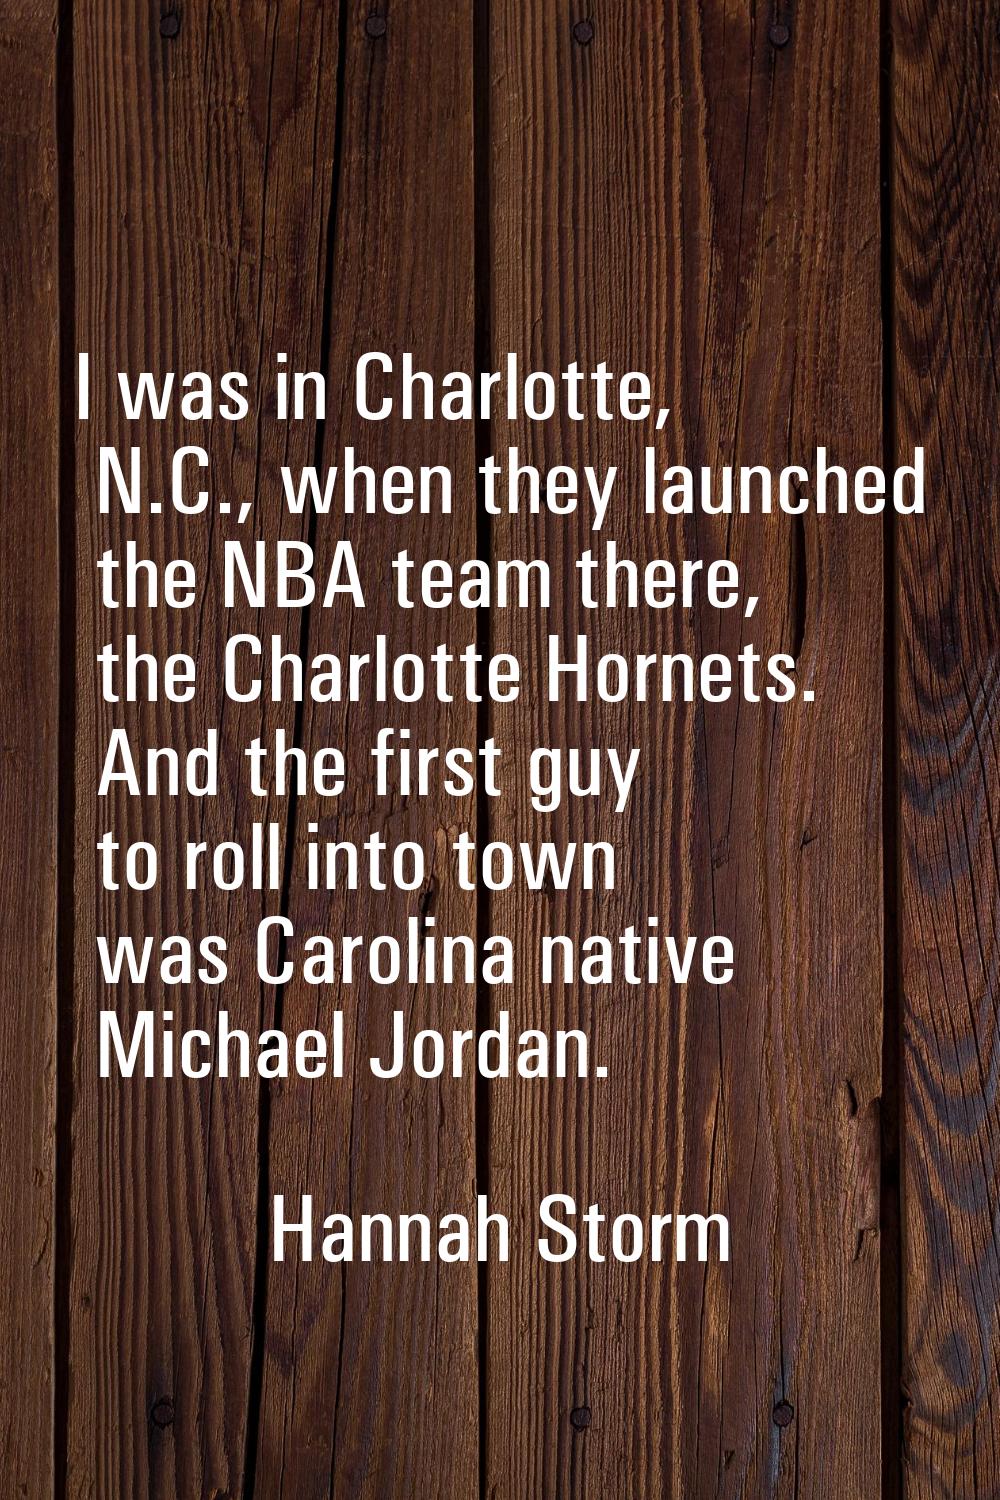 I was in Charlotte, N.C., when they launched the NBA team there, the Charlotte Hornets. And the fir